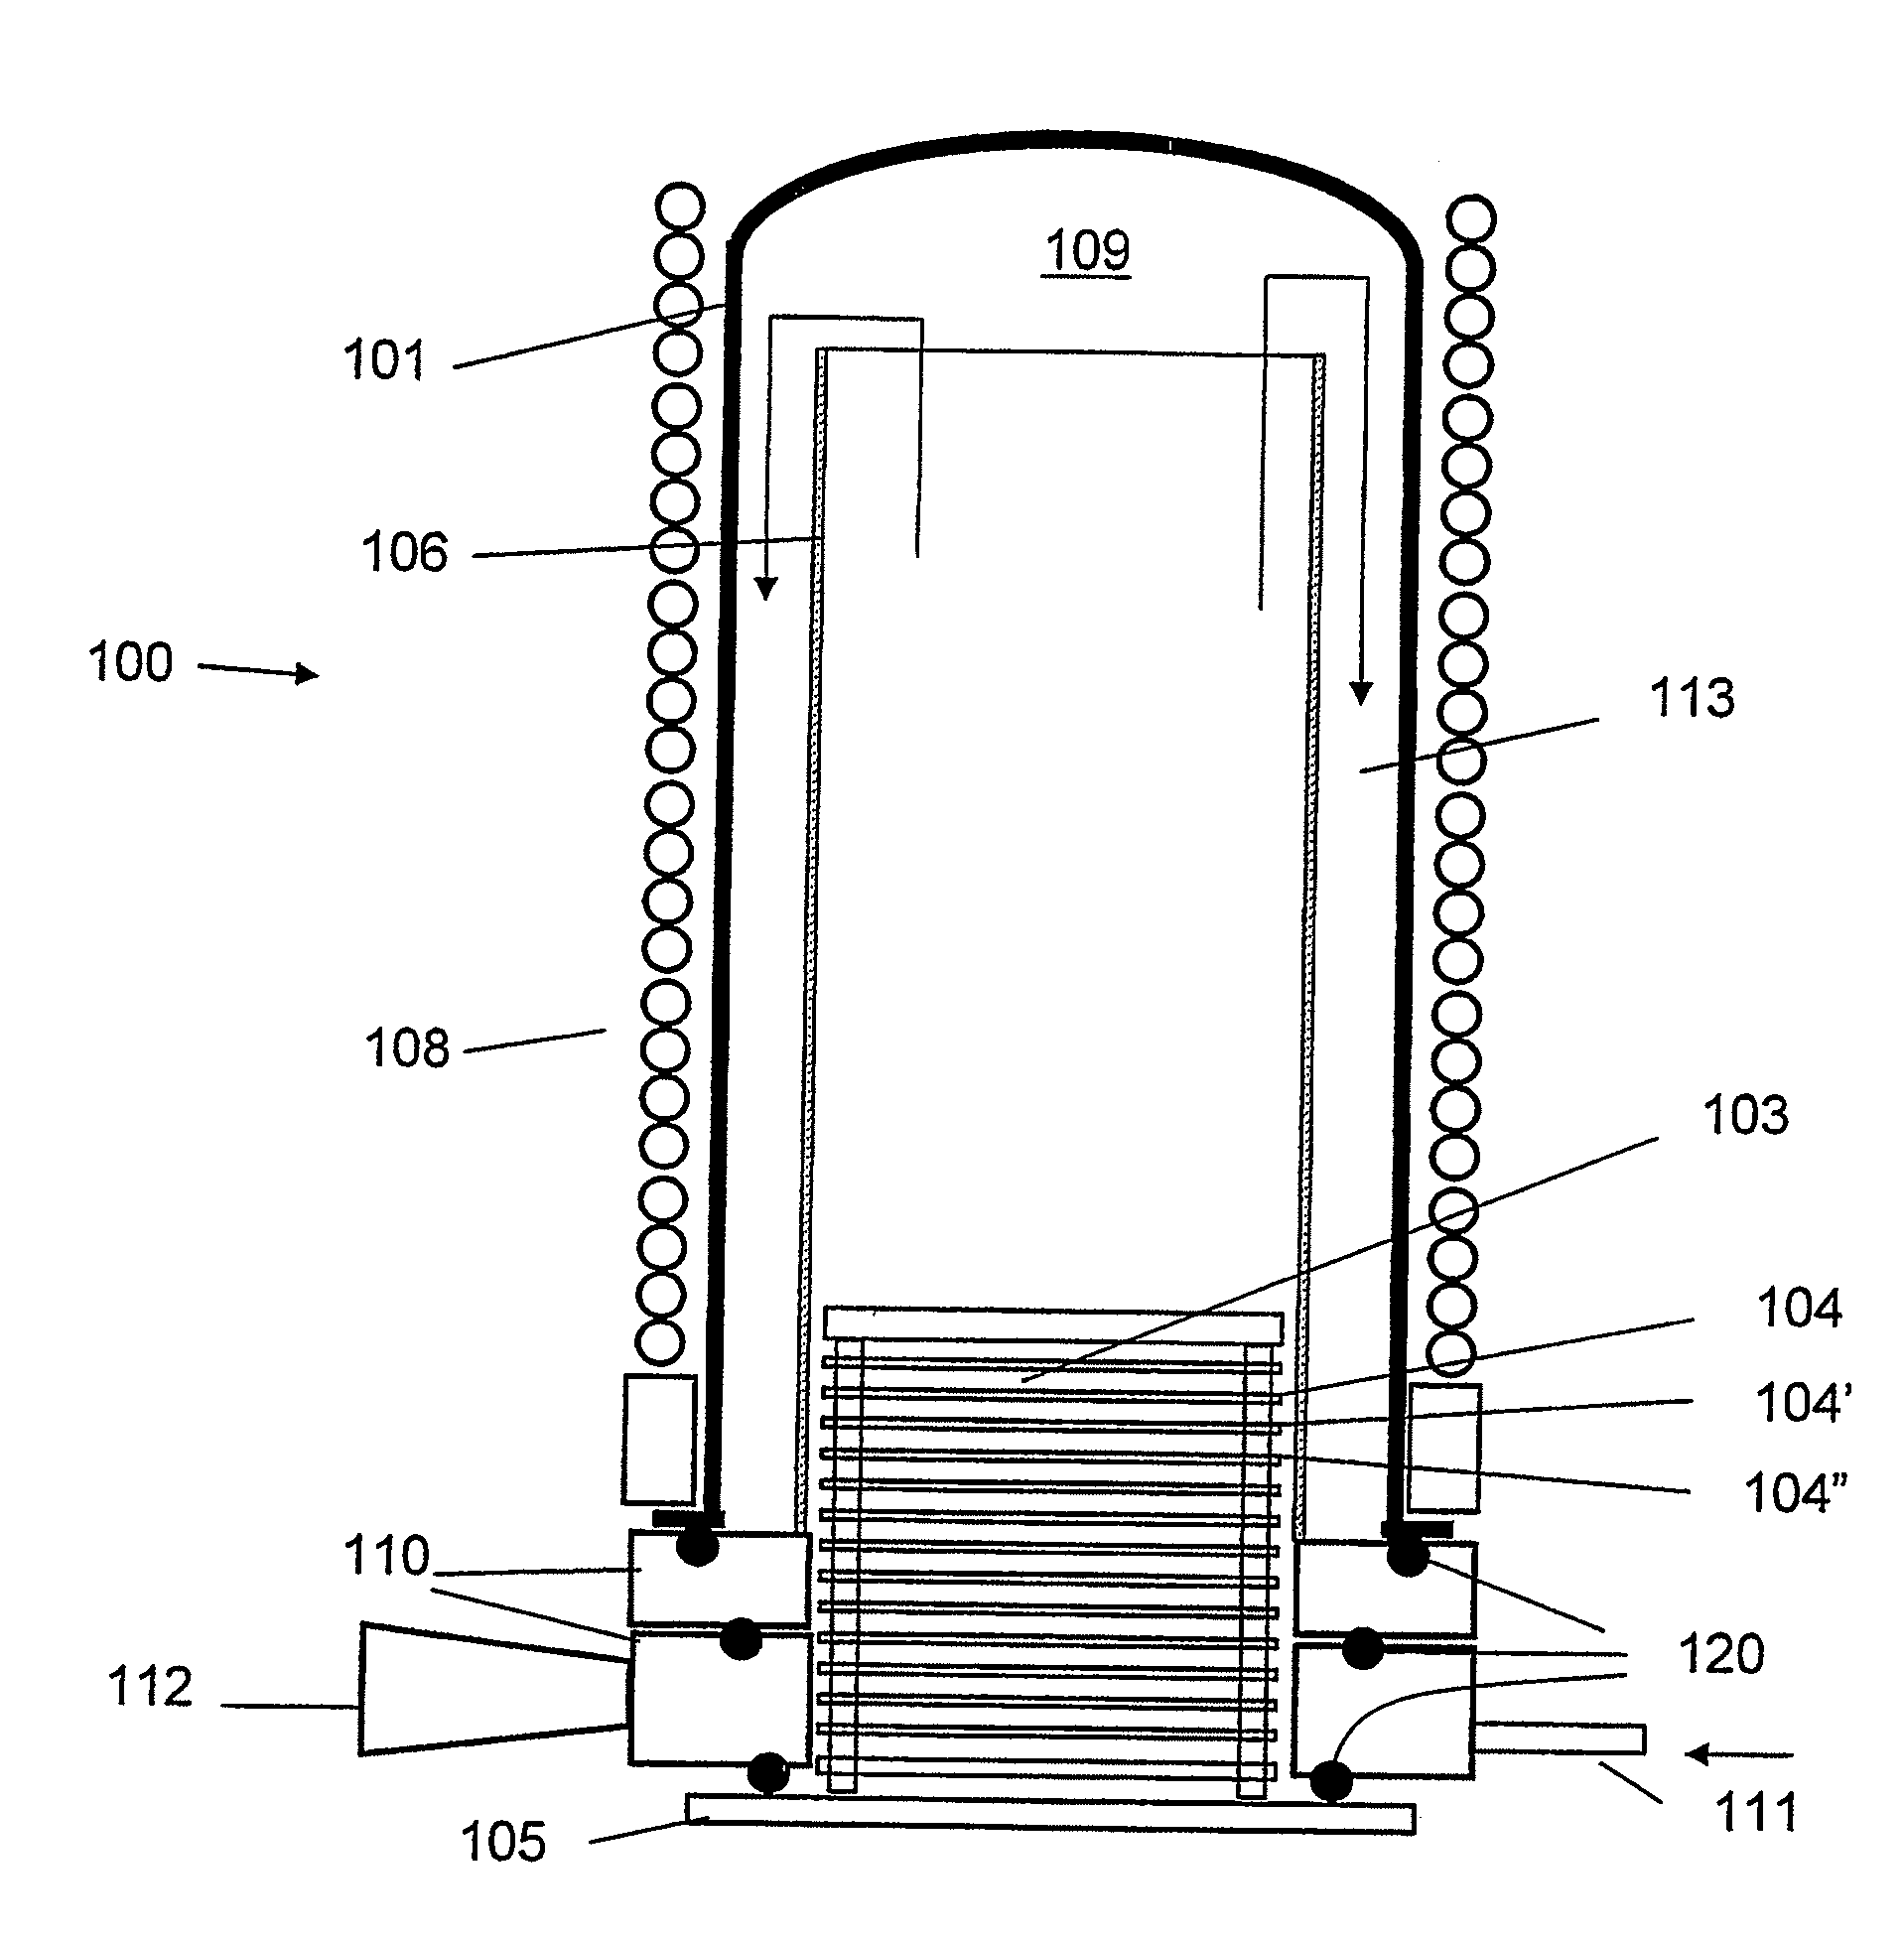 Semiconductor processing apparatus with improved thermal characteristics and method for providing the same